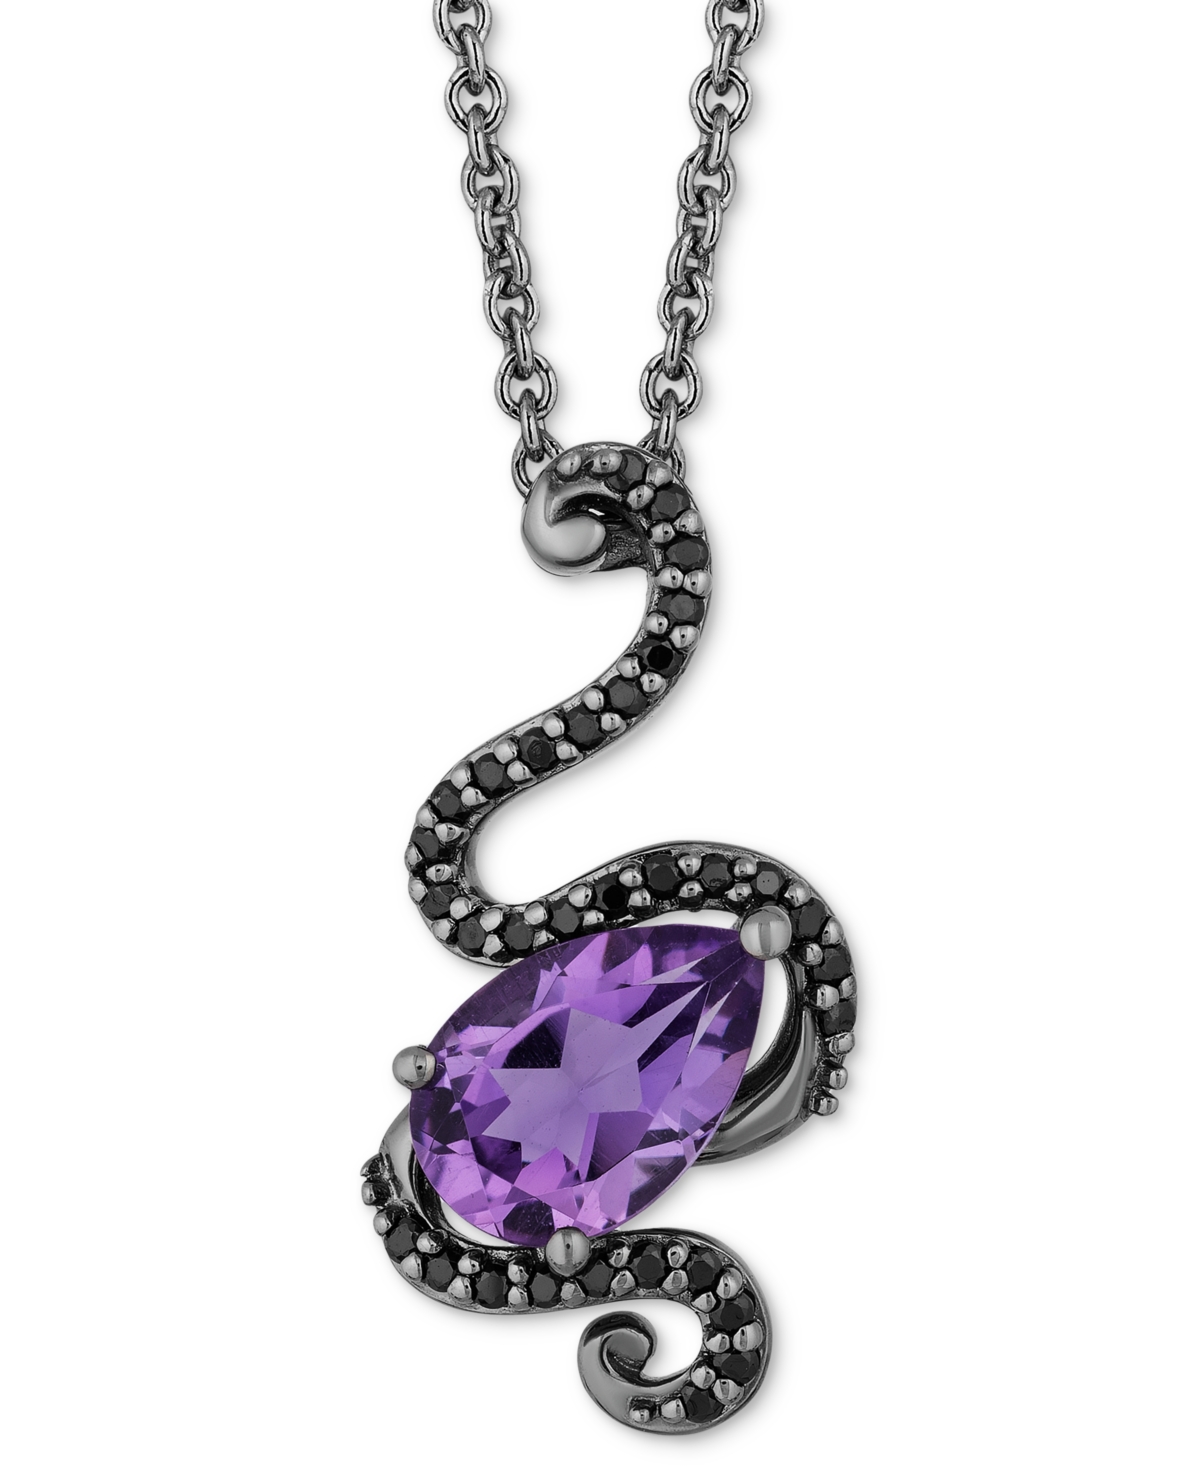 Amethyst (1-1/10 ct. t.w.) & Black Diamond (1/6 ct. t.w.) Ursula Tentacle Pendant Necklace in Black Rhodium-Plated Sterl